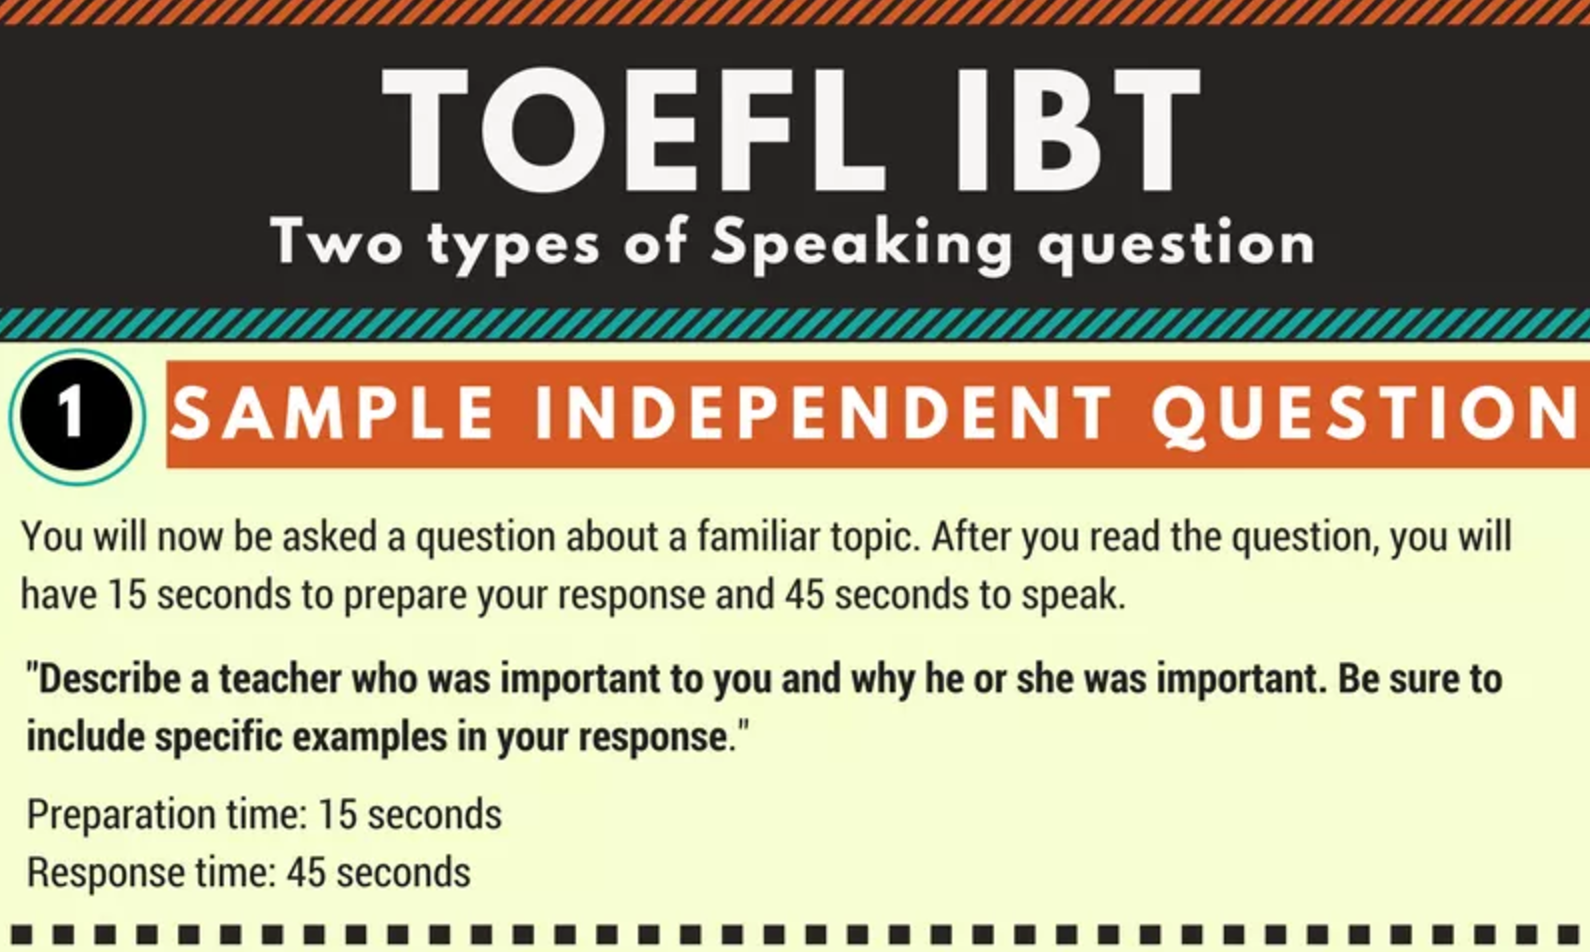 TOEFL iBT Speaking - Two types of question and sample answer